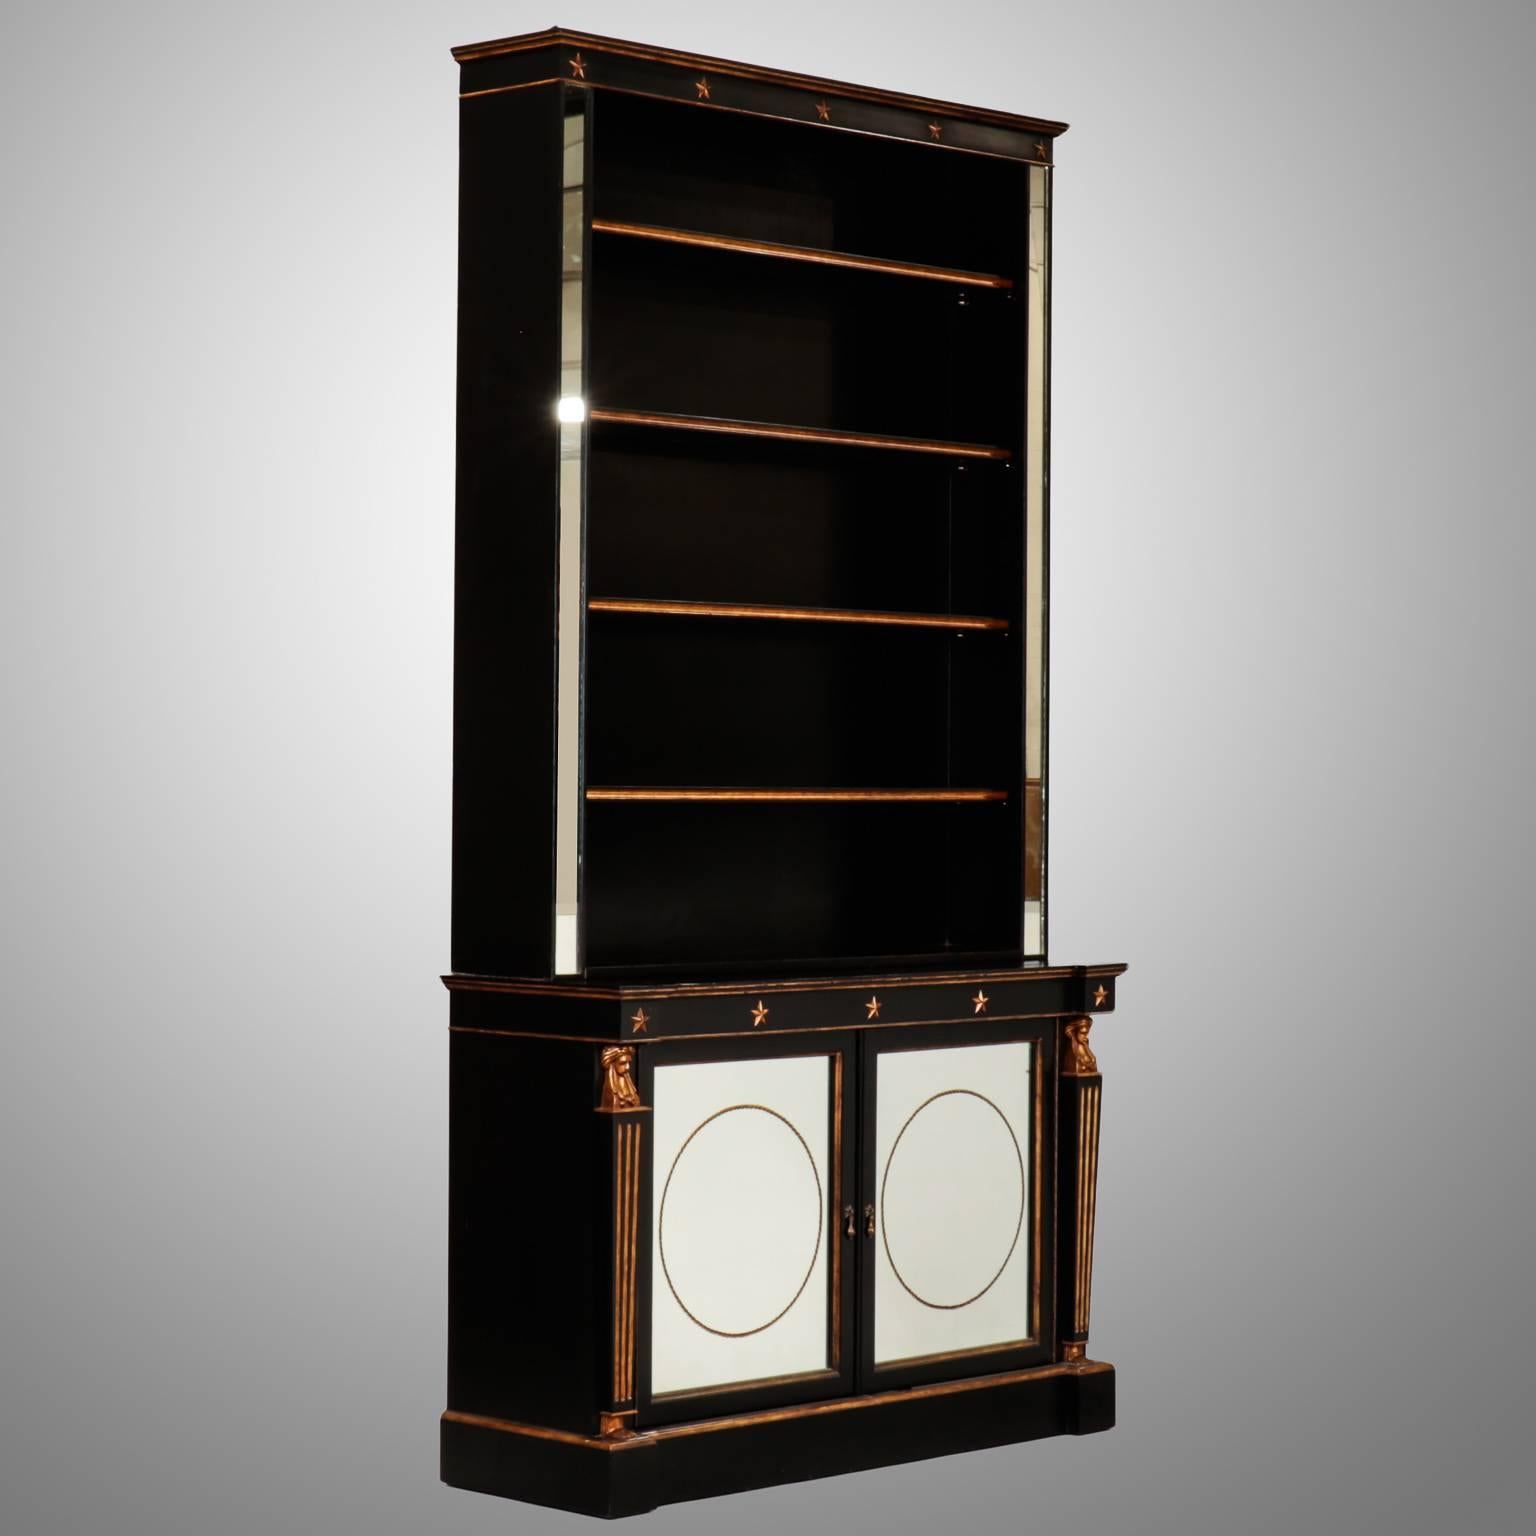 Late 19th century cabinet with bookcase has a freshly ebonised finish with carved and gilded details. Lower cabinet has one internal shelf, mirrored panel fronts with reverse painted detail of rope twist circles, reeded columns with carved and